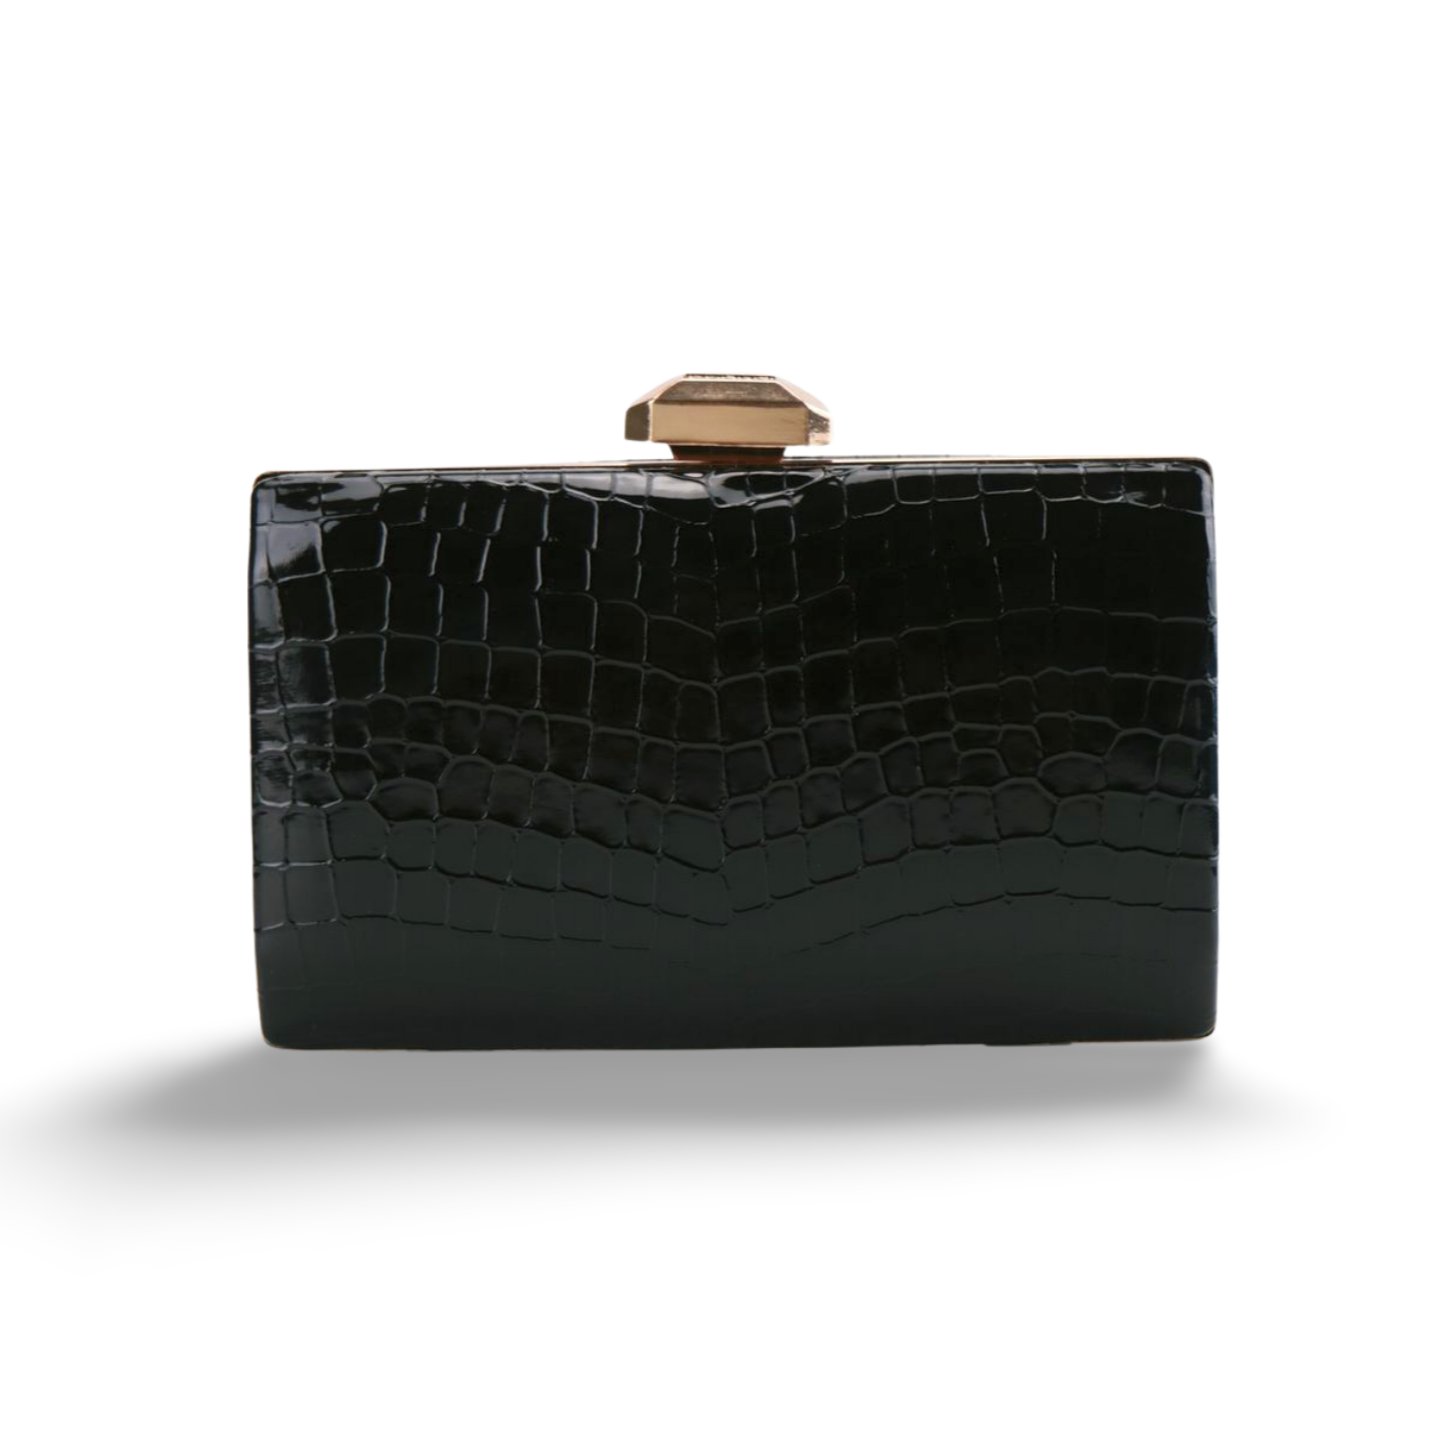 Croc Skin Textured Faux Leather Clutch Bag For Women